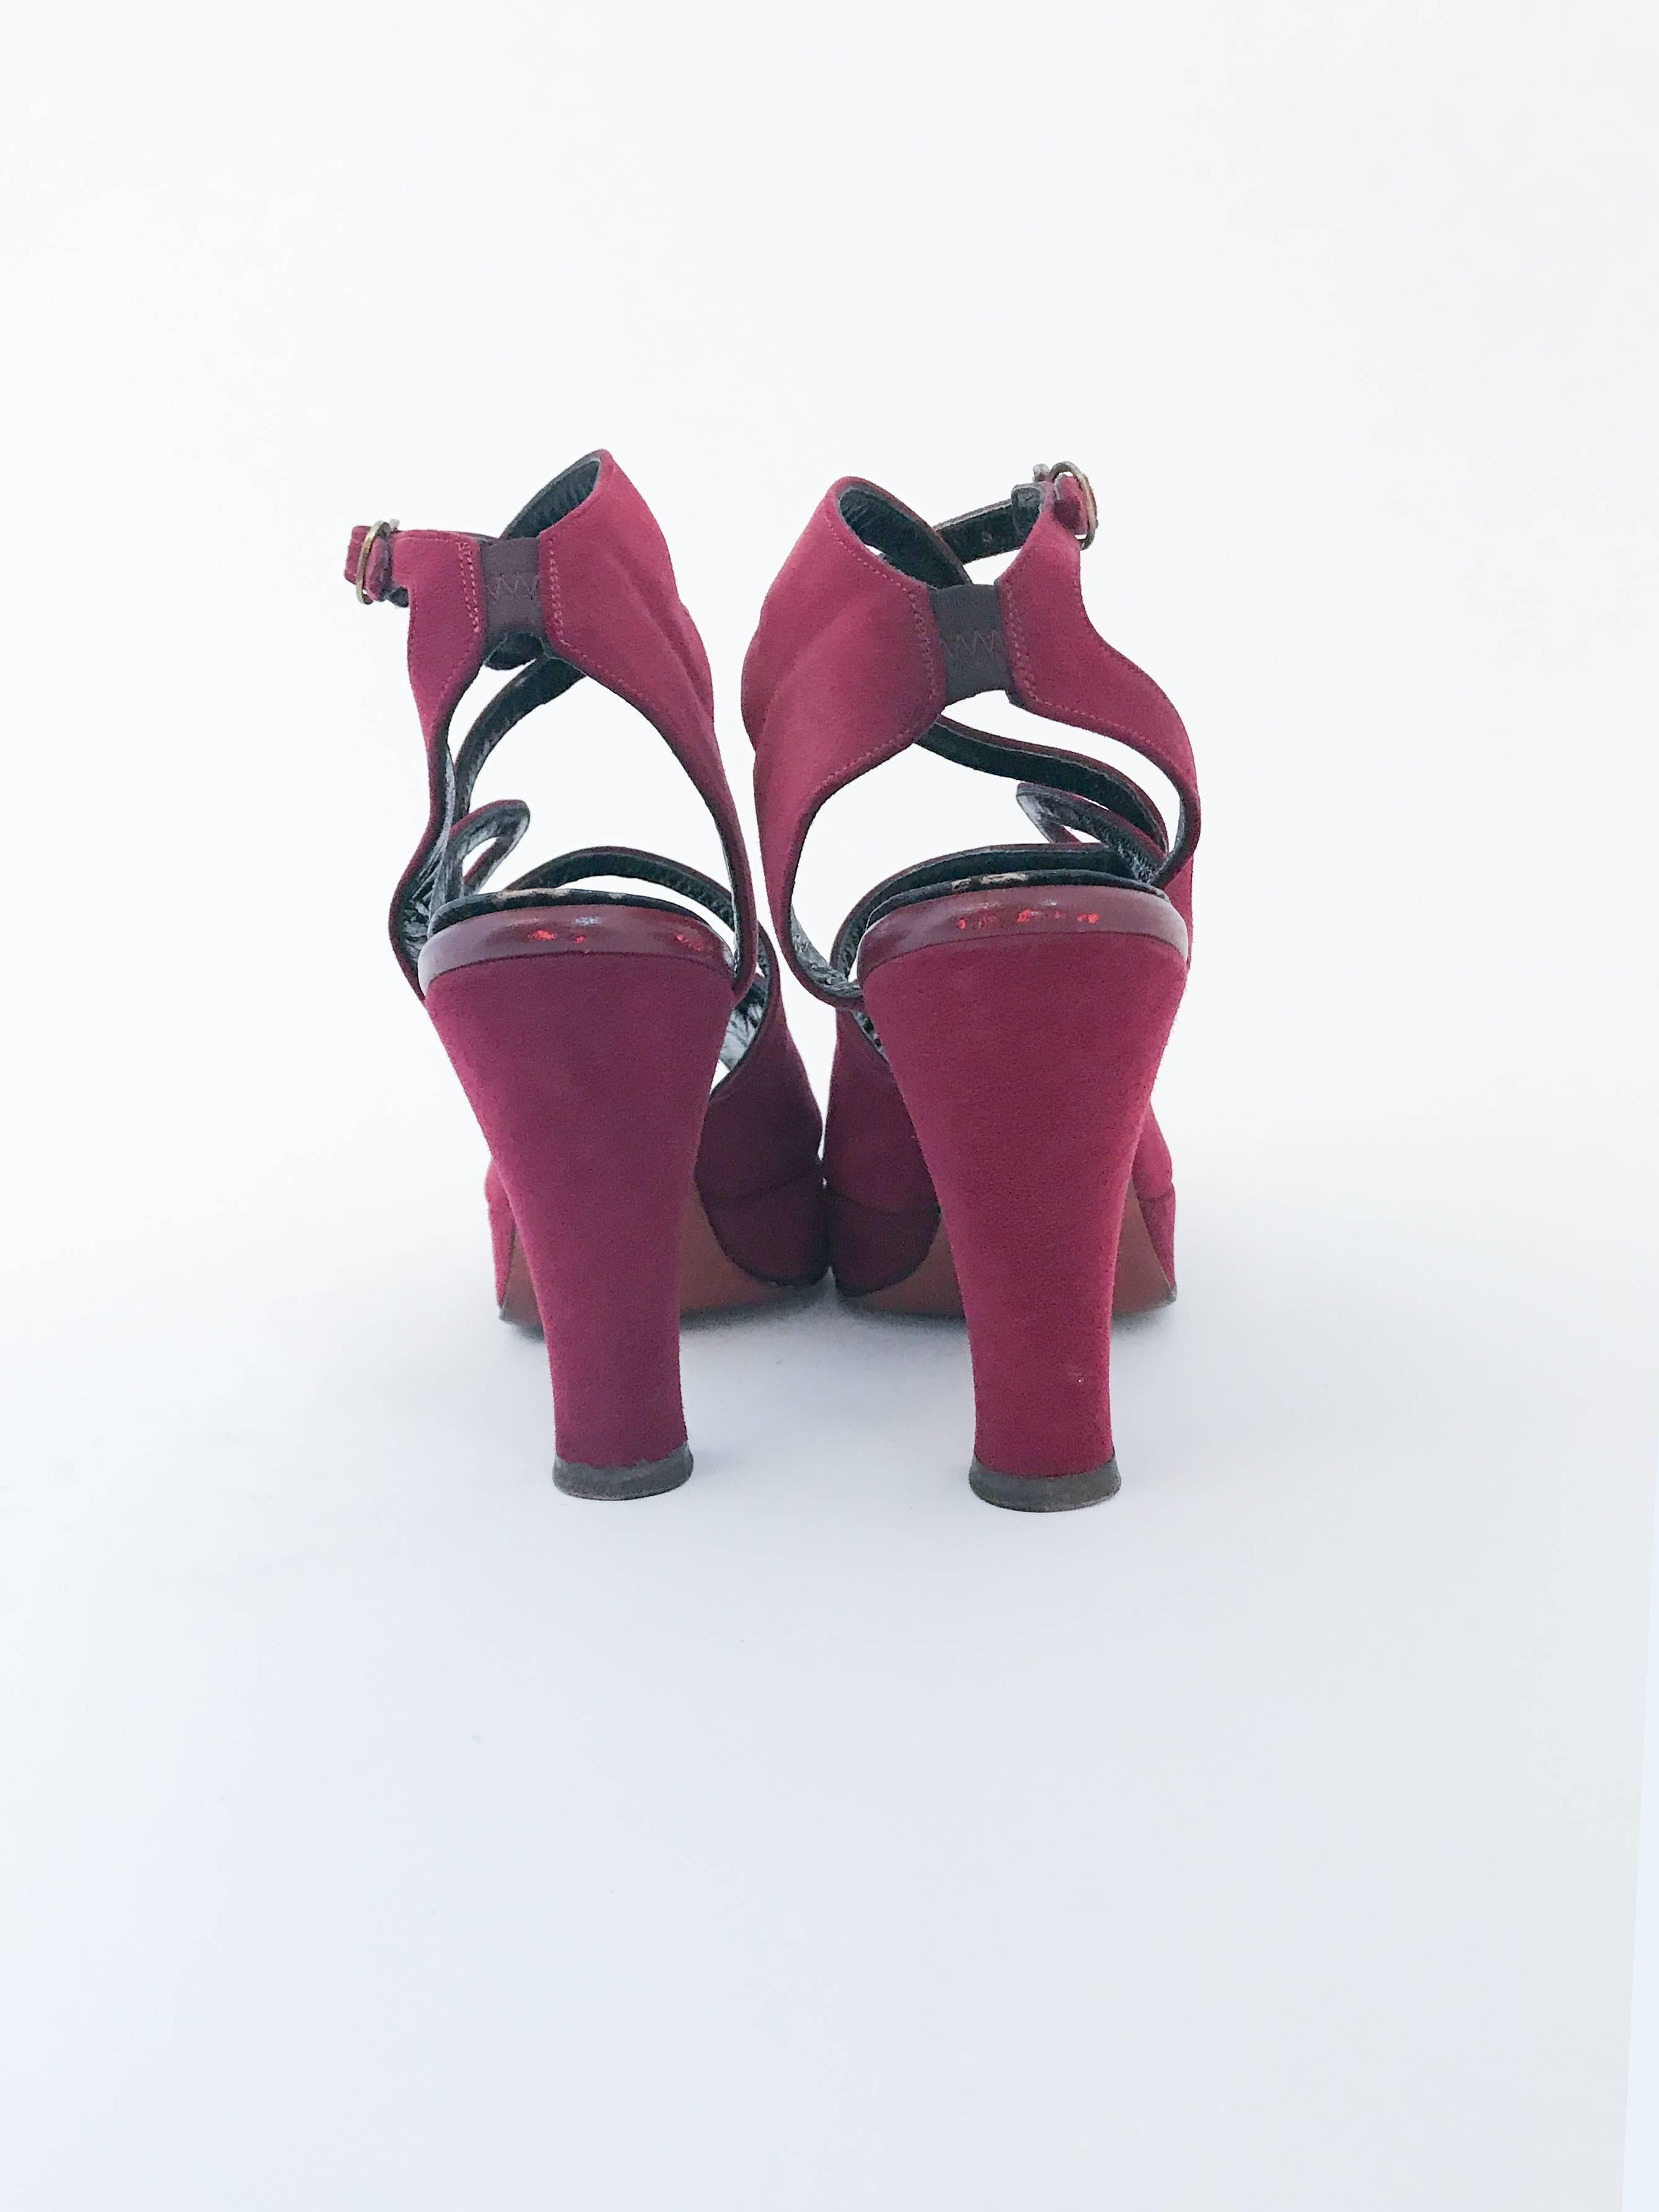 Women's 1947 Plum Suede Heels With Strap and Cut-out Accents For Sale